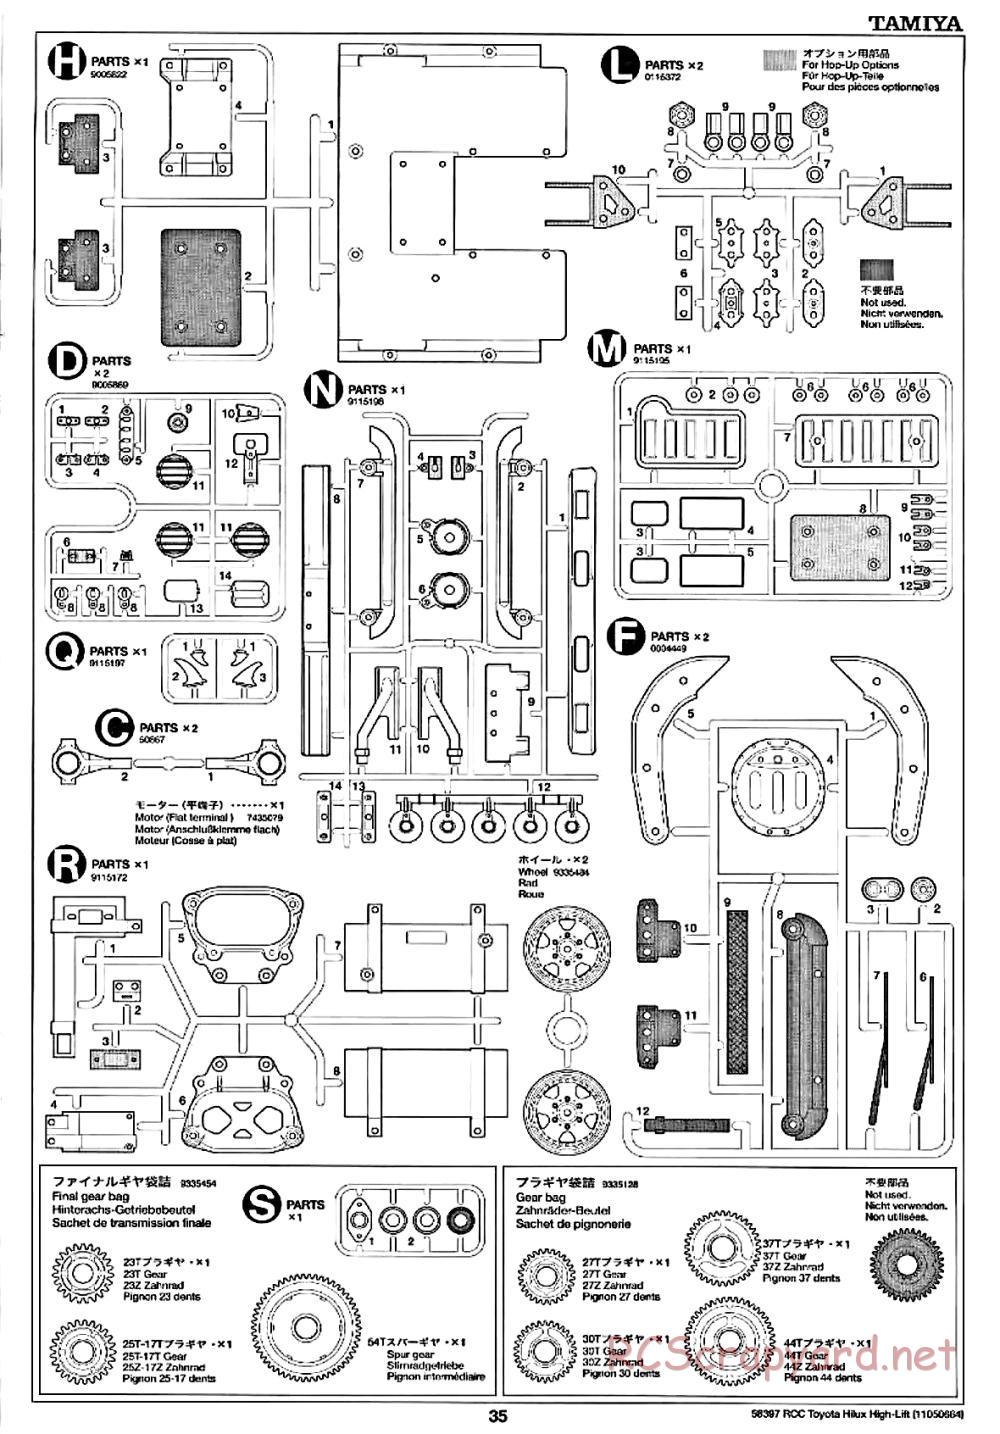 Tamiya - Toyota Hilux High-Lift Chassis - Manual - Page 30